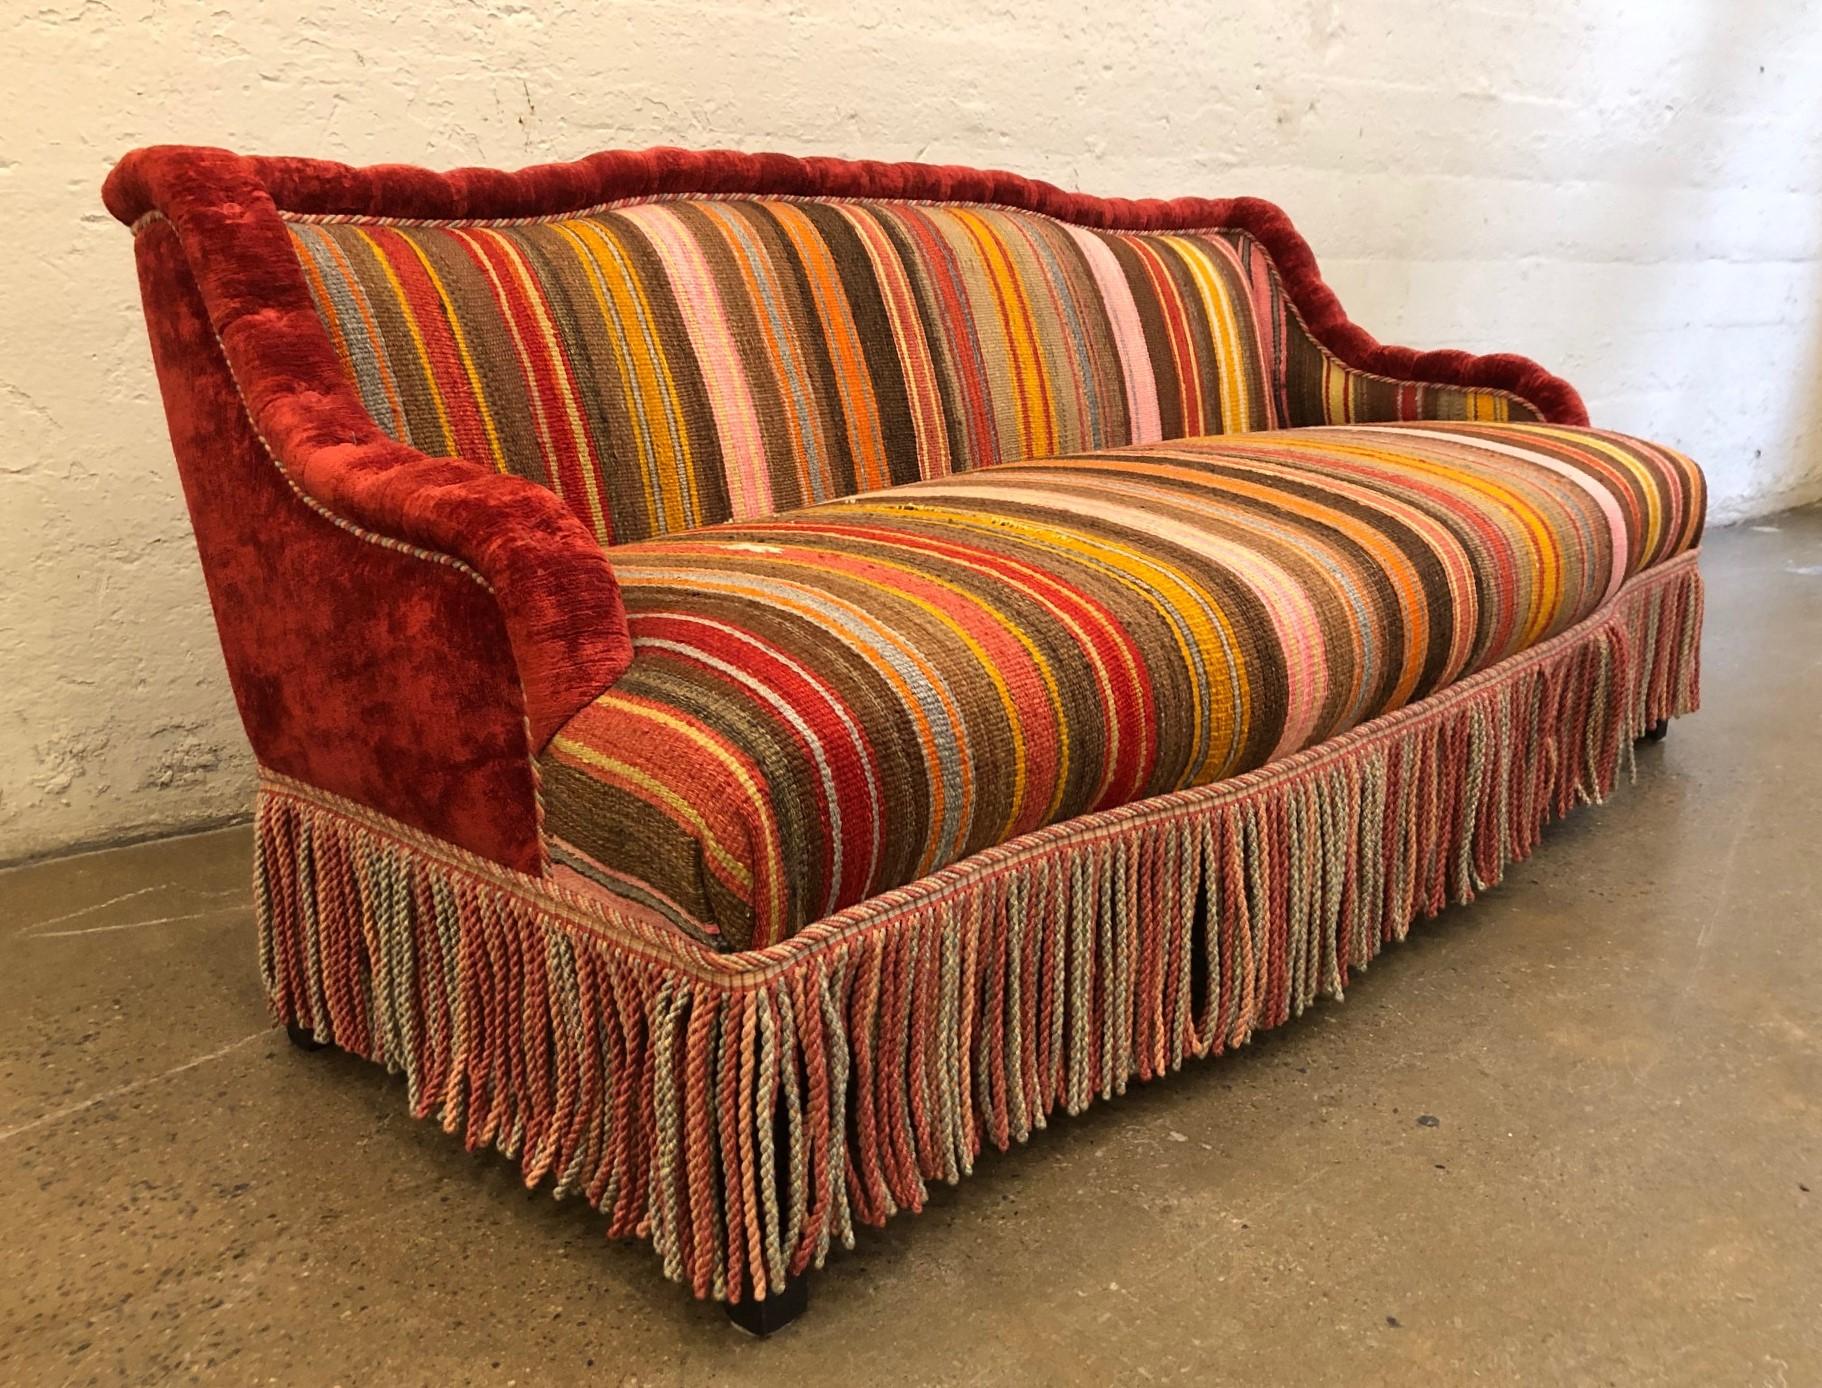 Custom made sofa in vintage flat-woven Kilim. The back is mohair as well as the trim of the sofa. The sofa has wooden legs.